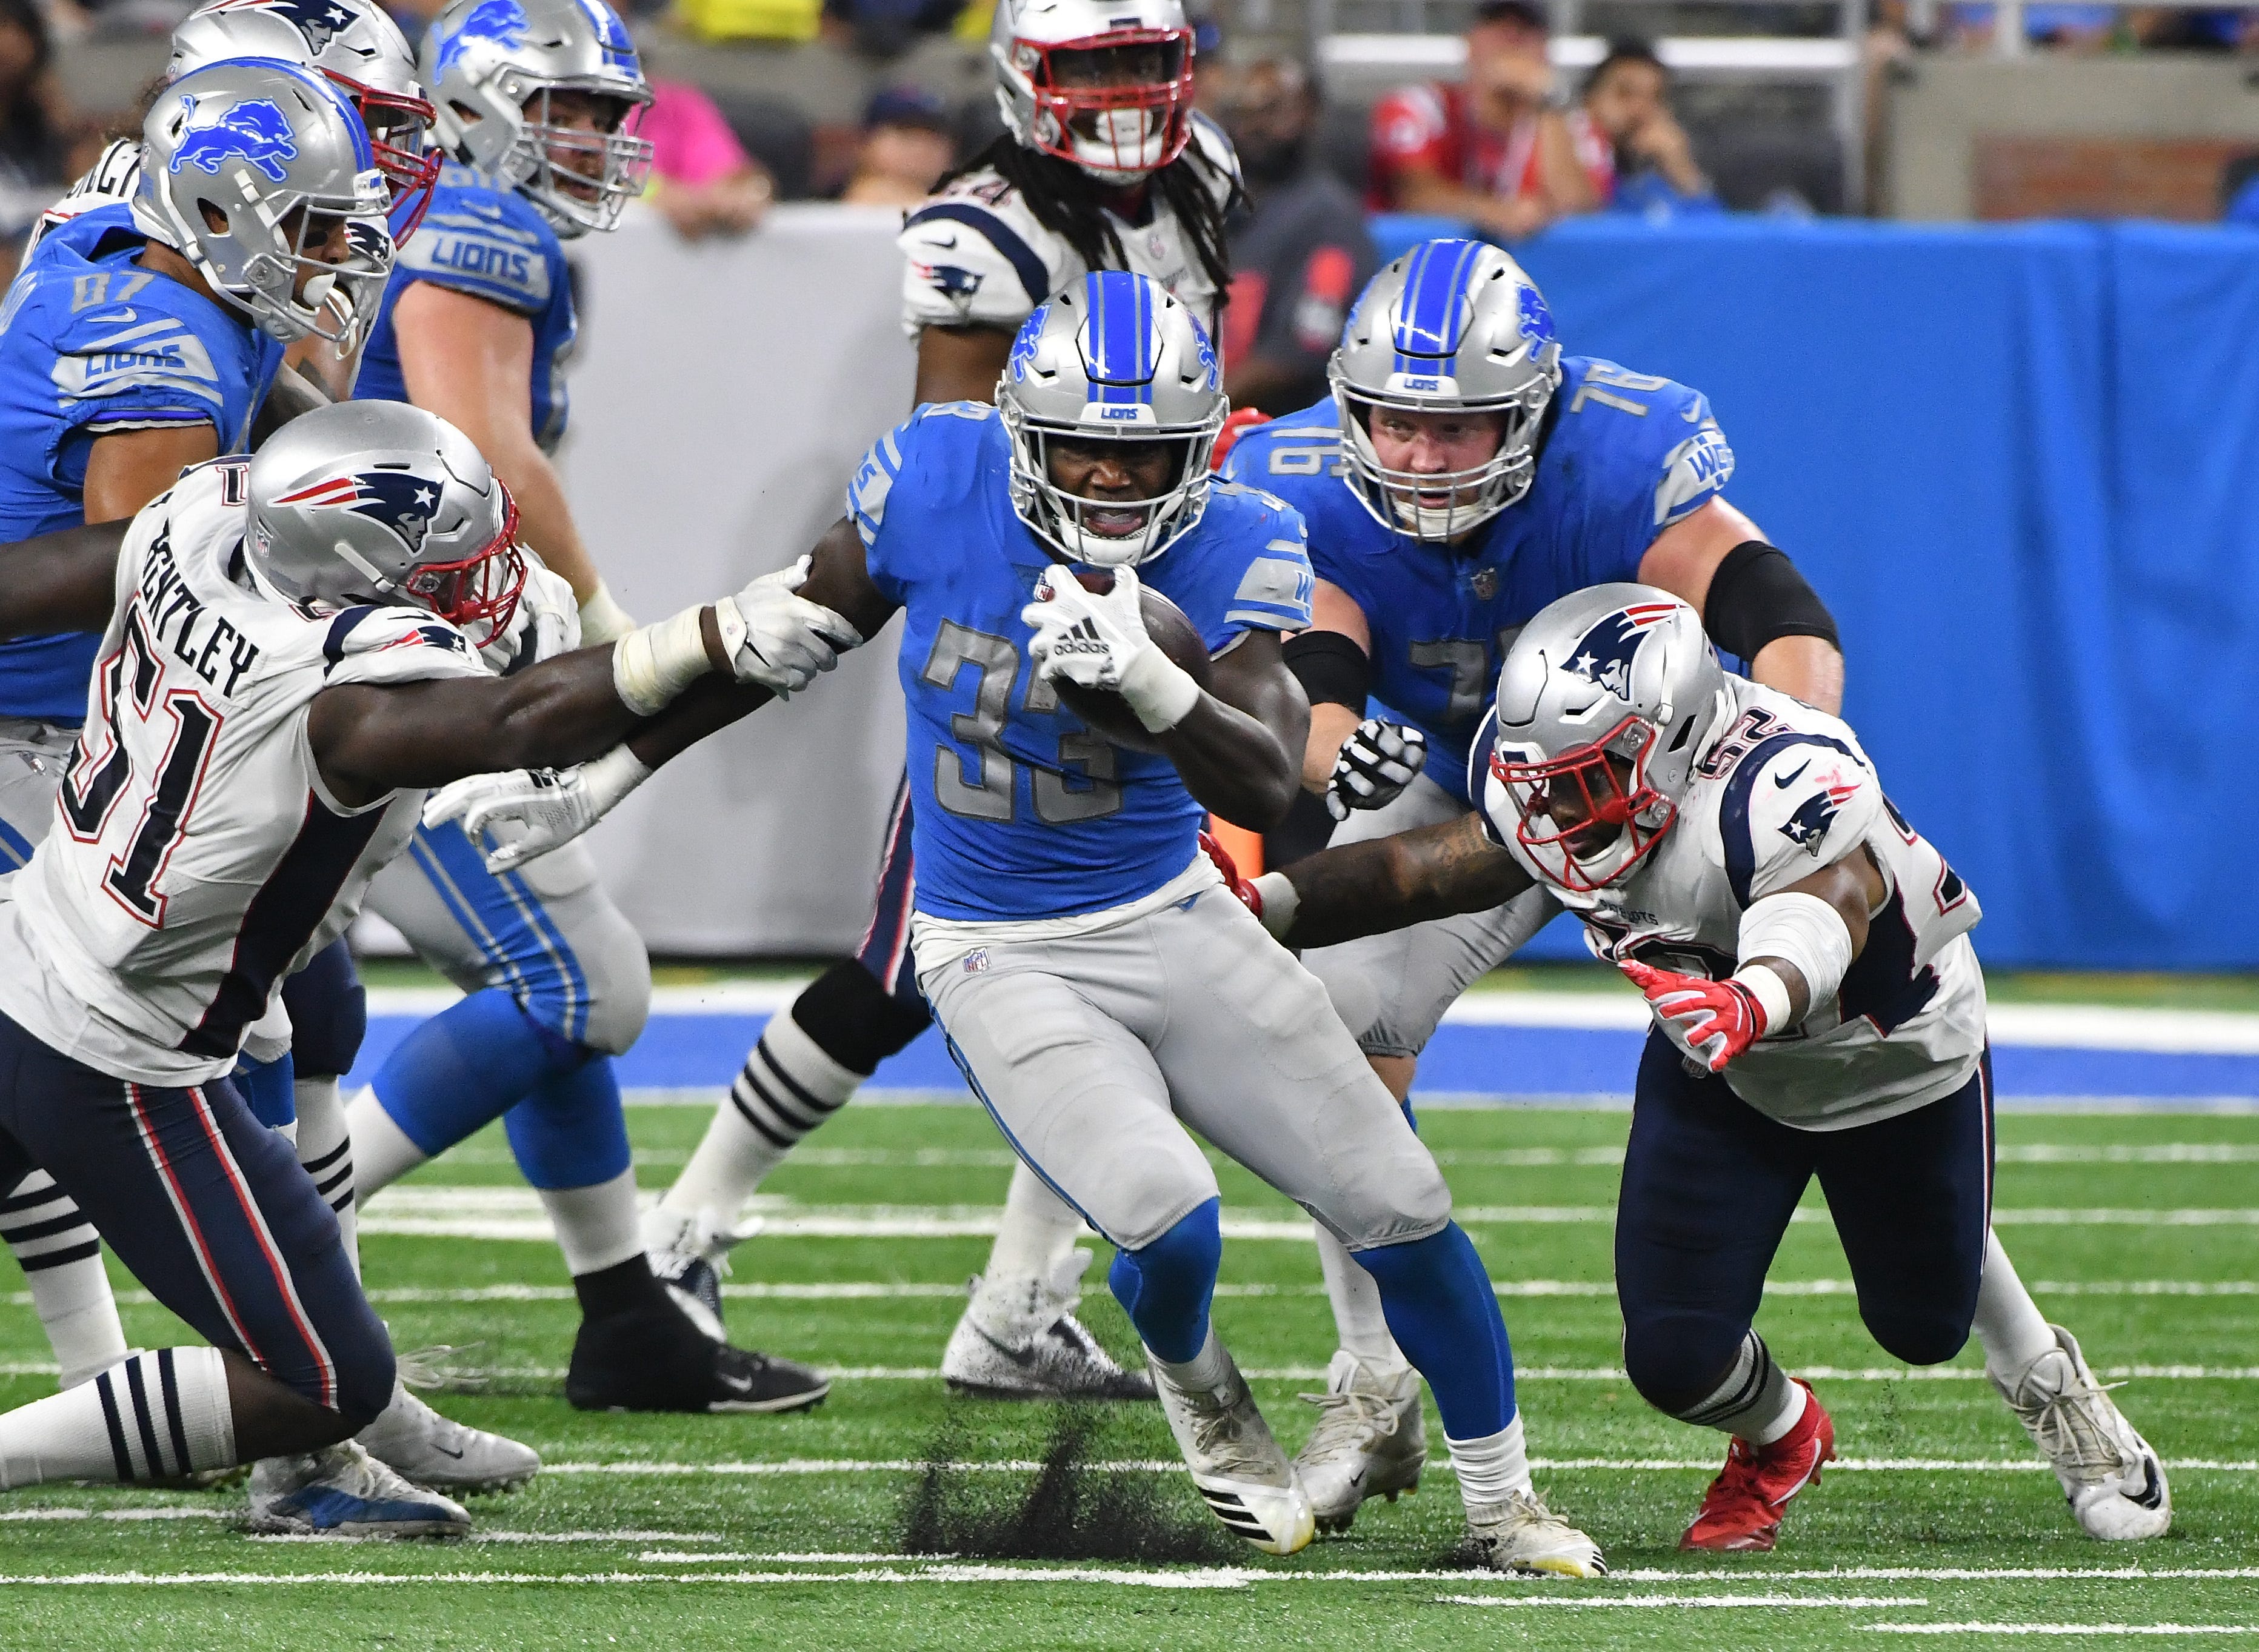 Lions running back Kerryon Johnson breaks up field for a first-down run in the third quarter.